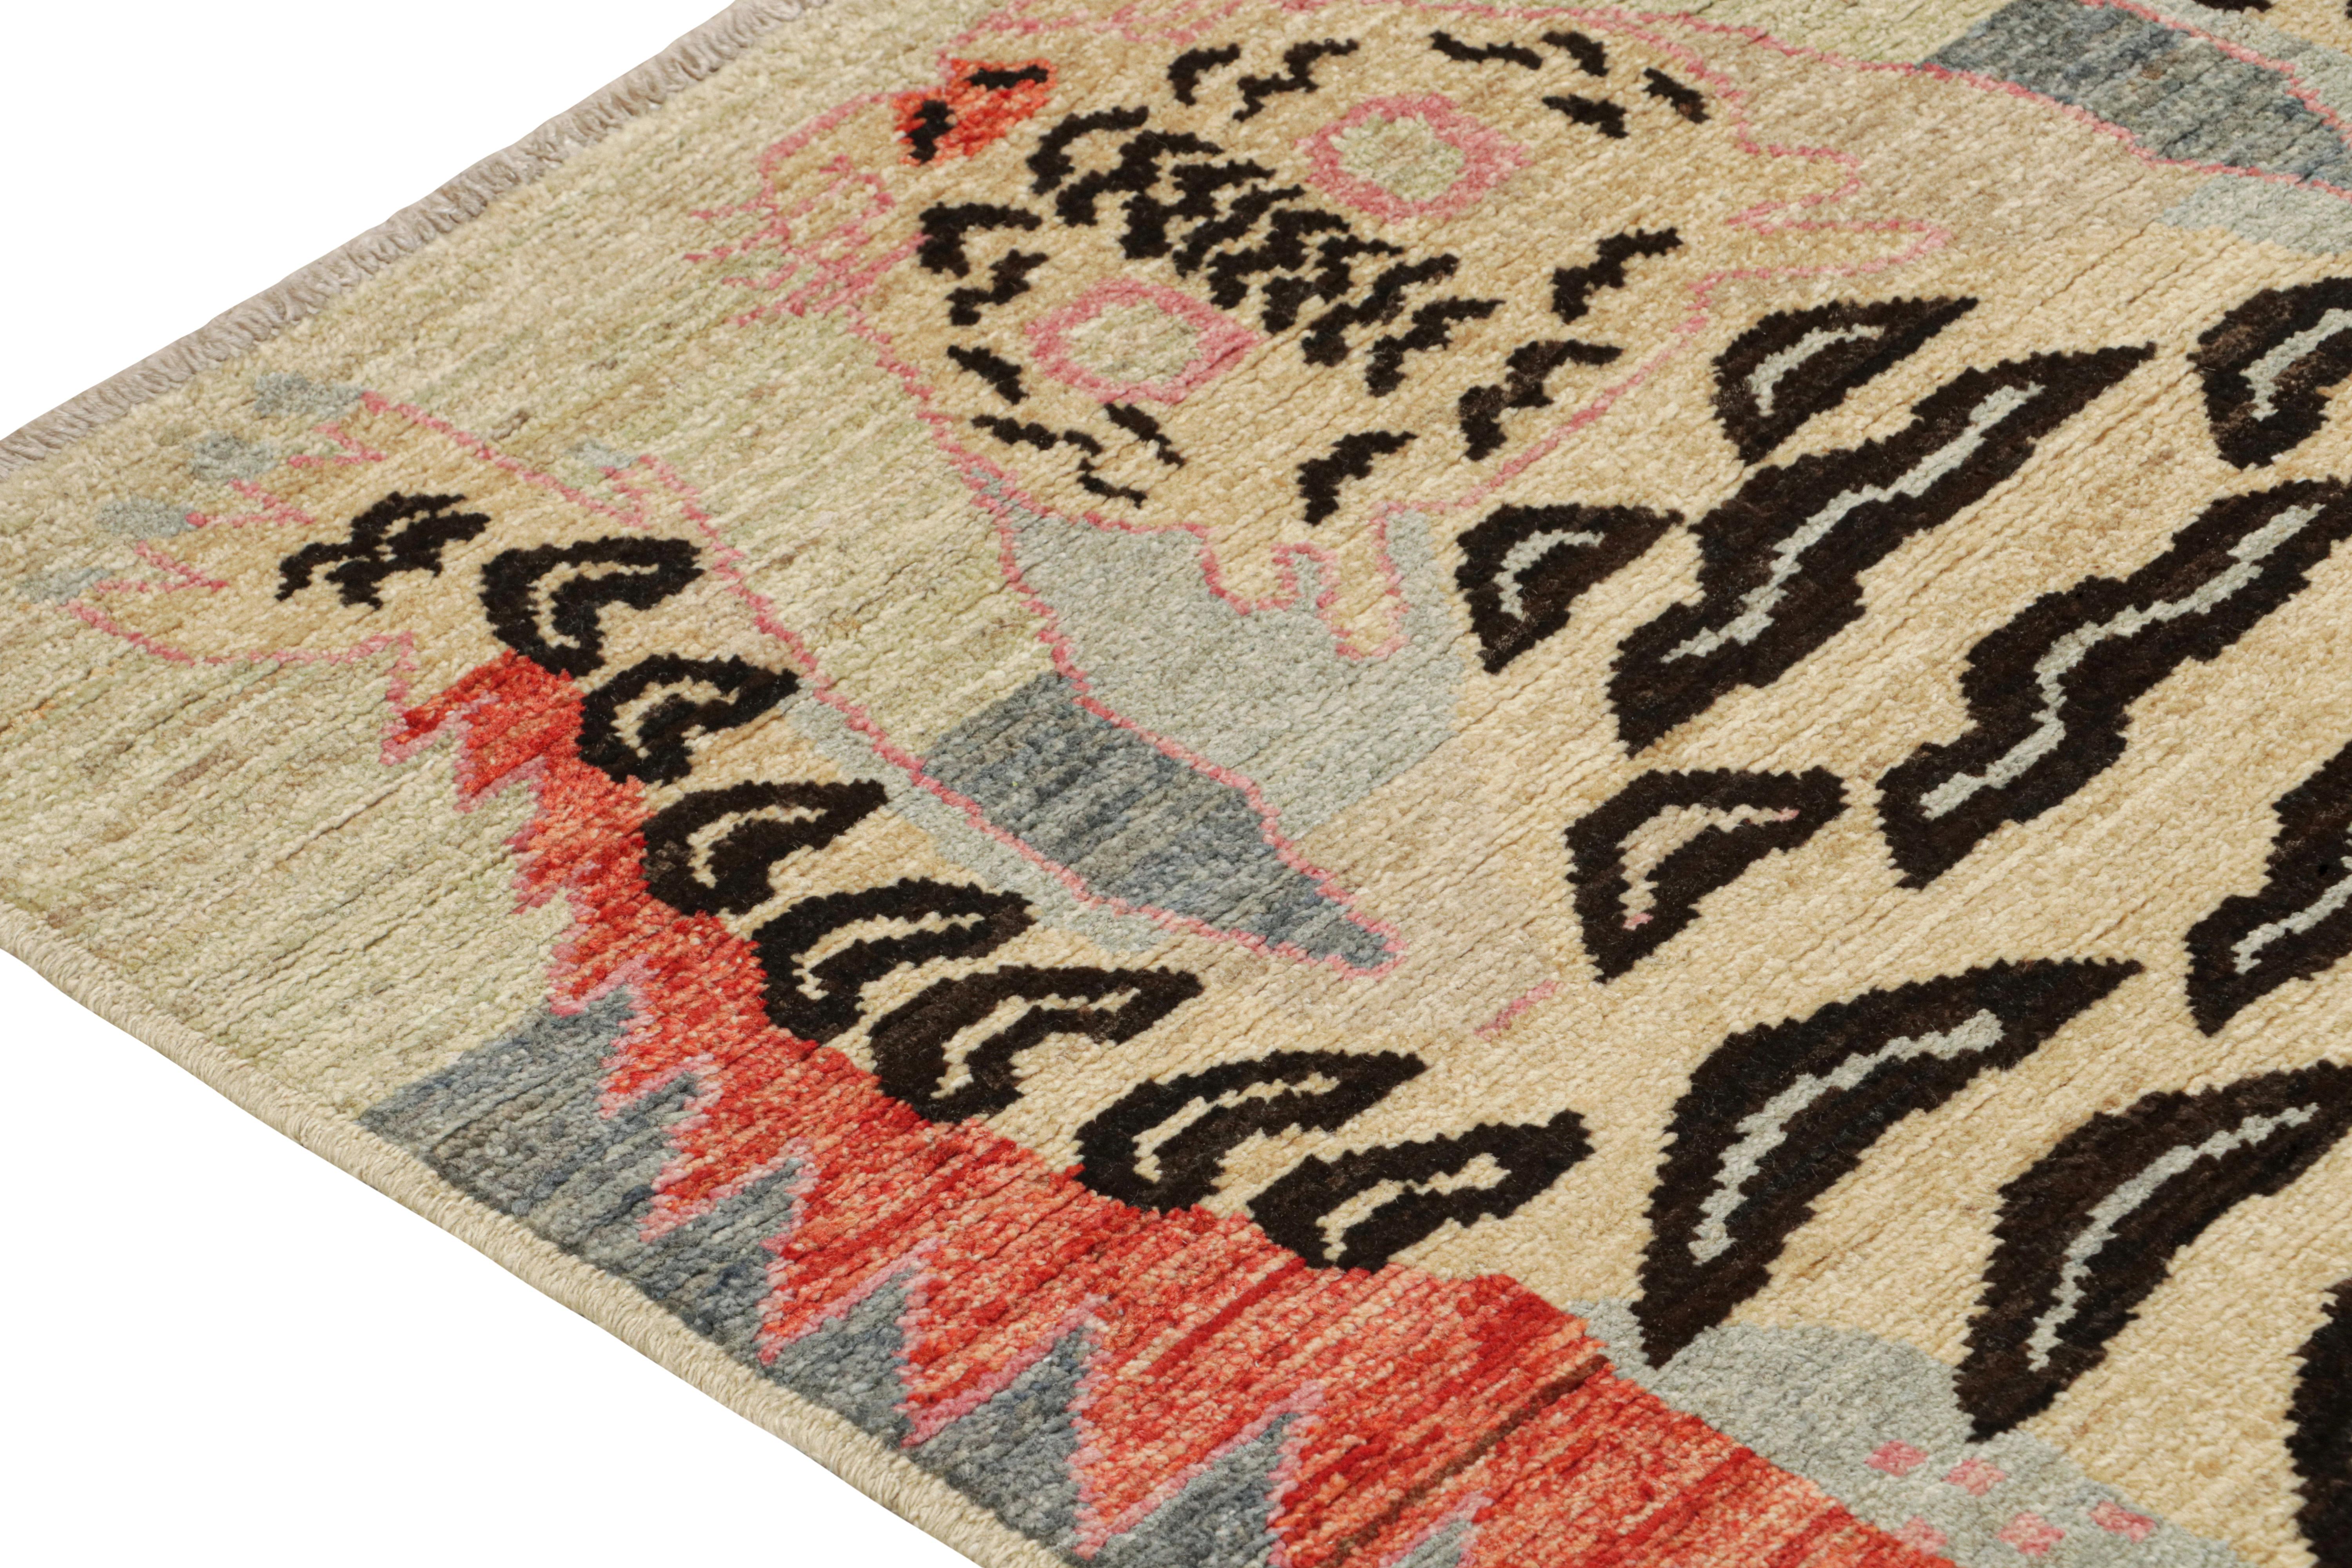 Rug & Kilim’s Classic Style Tiger-Skin Runner in Beige with Geometric Pictorial In New Condition For Sale In Long Island City, NY